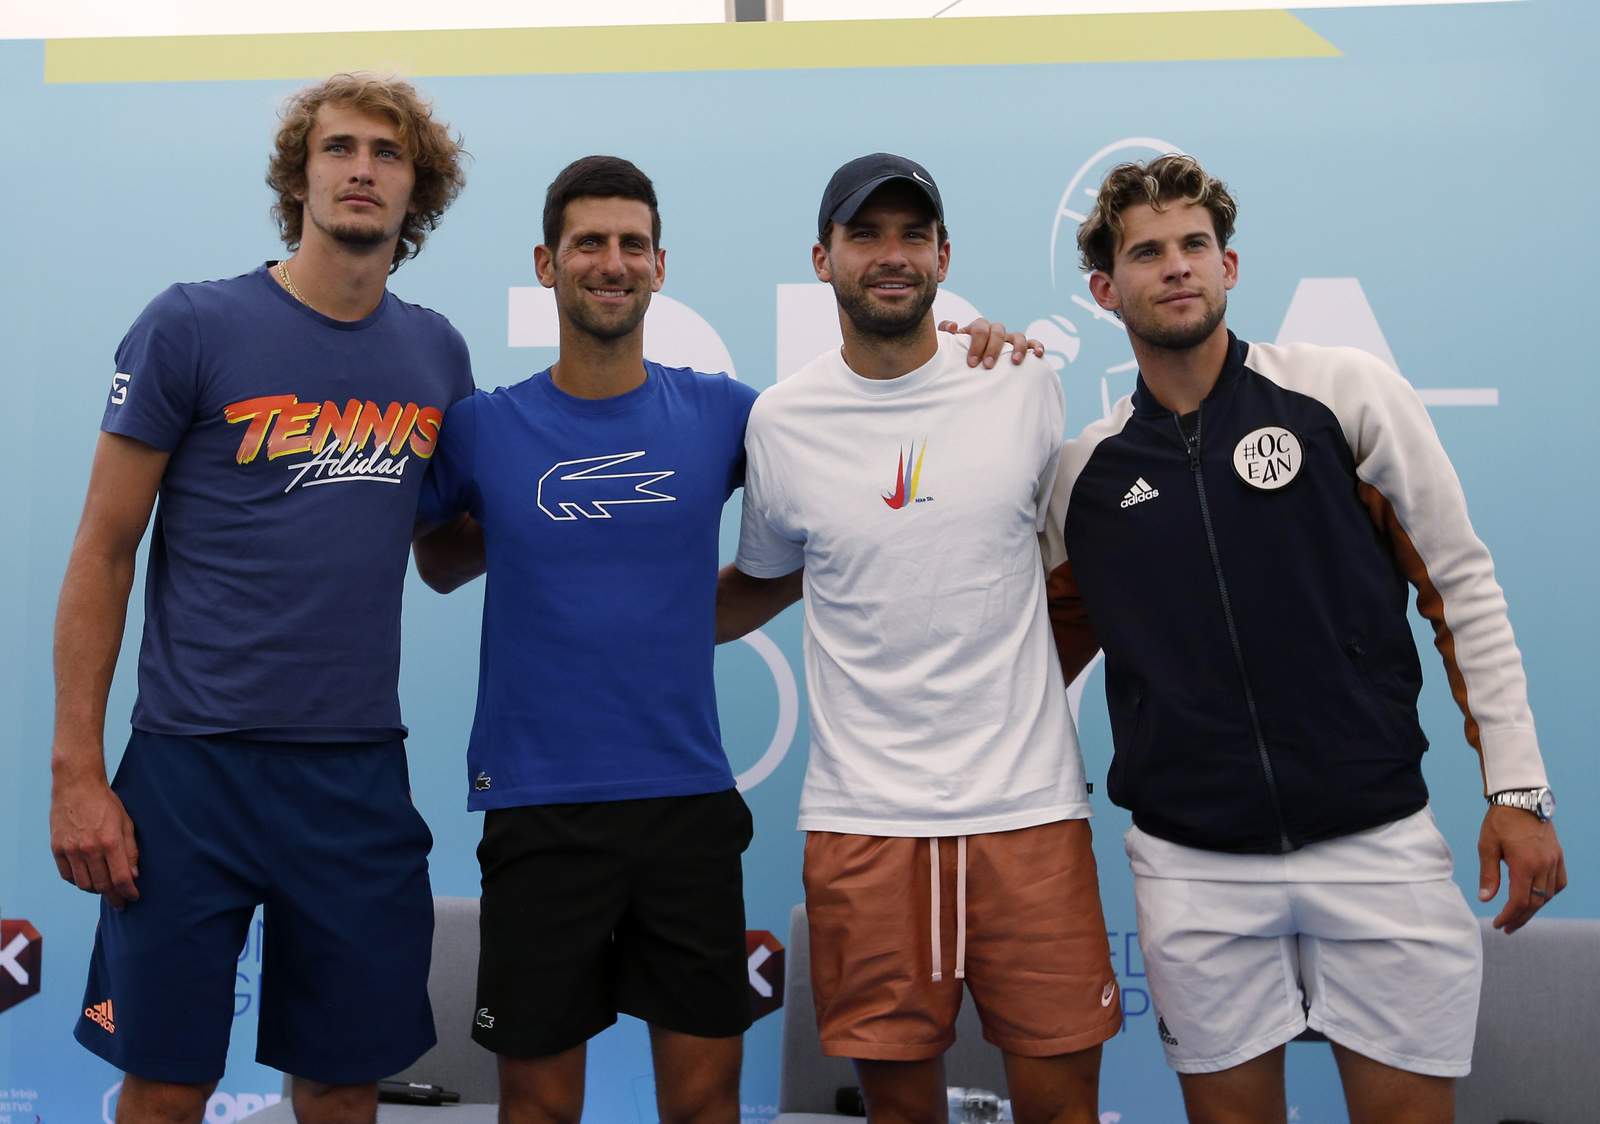 Thiem apologizes for playing in Djokovic's tennis event